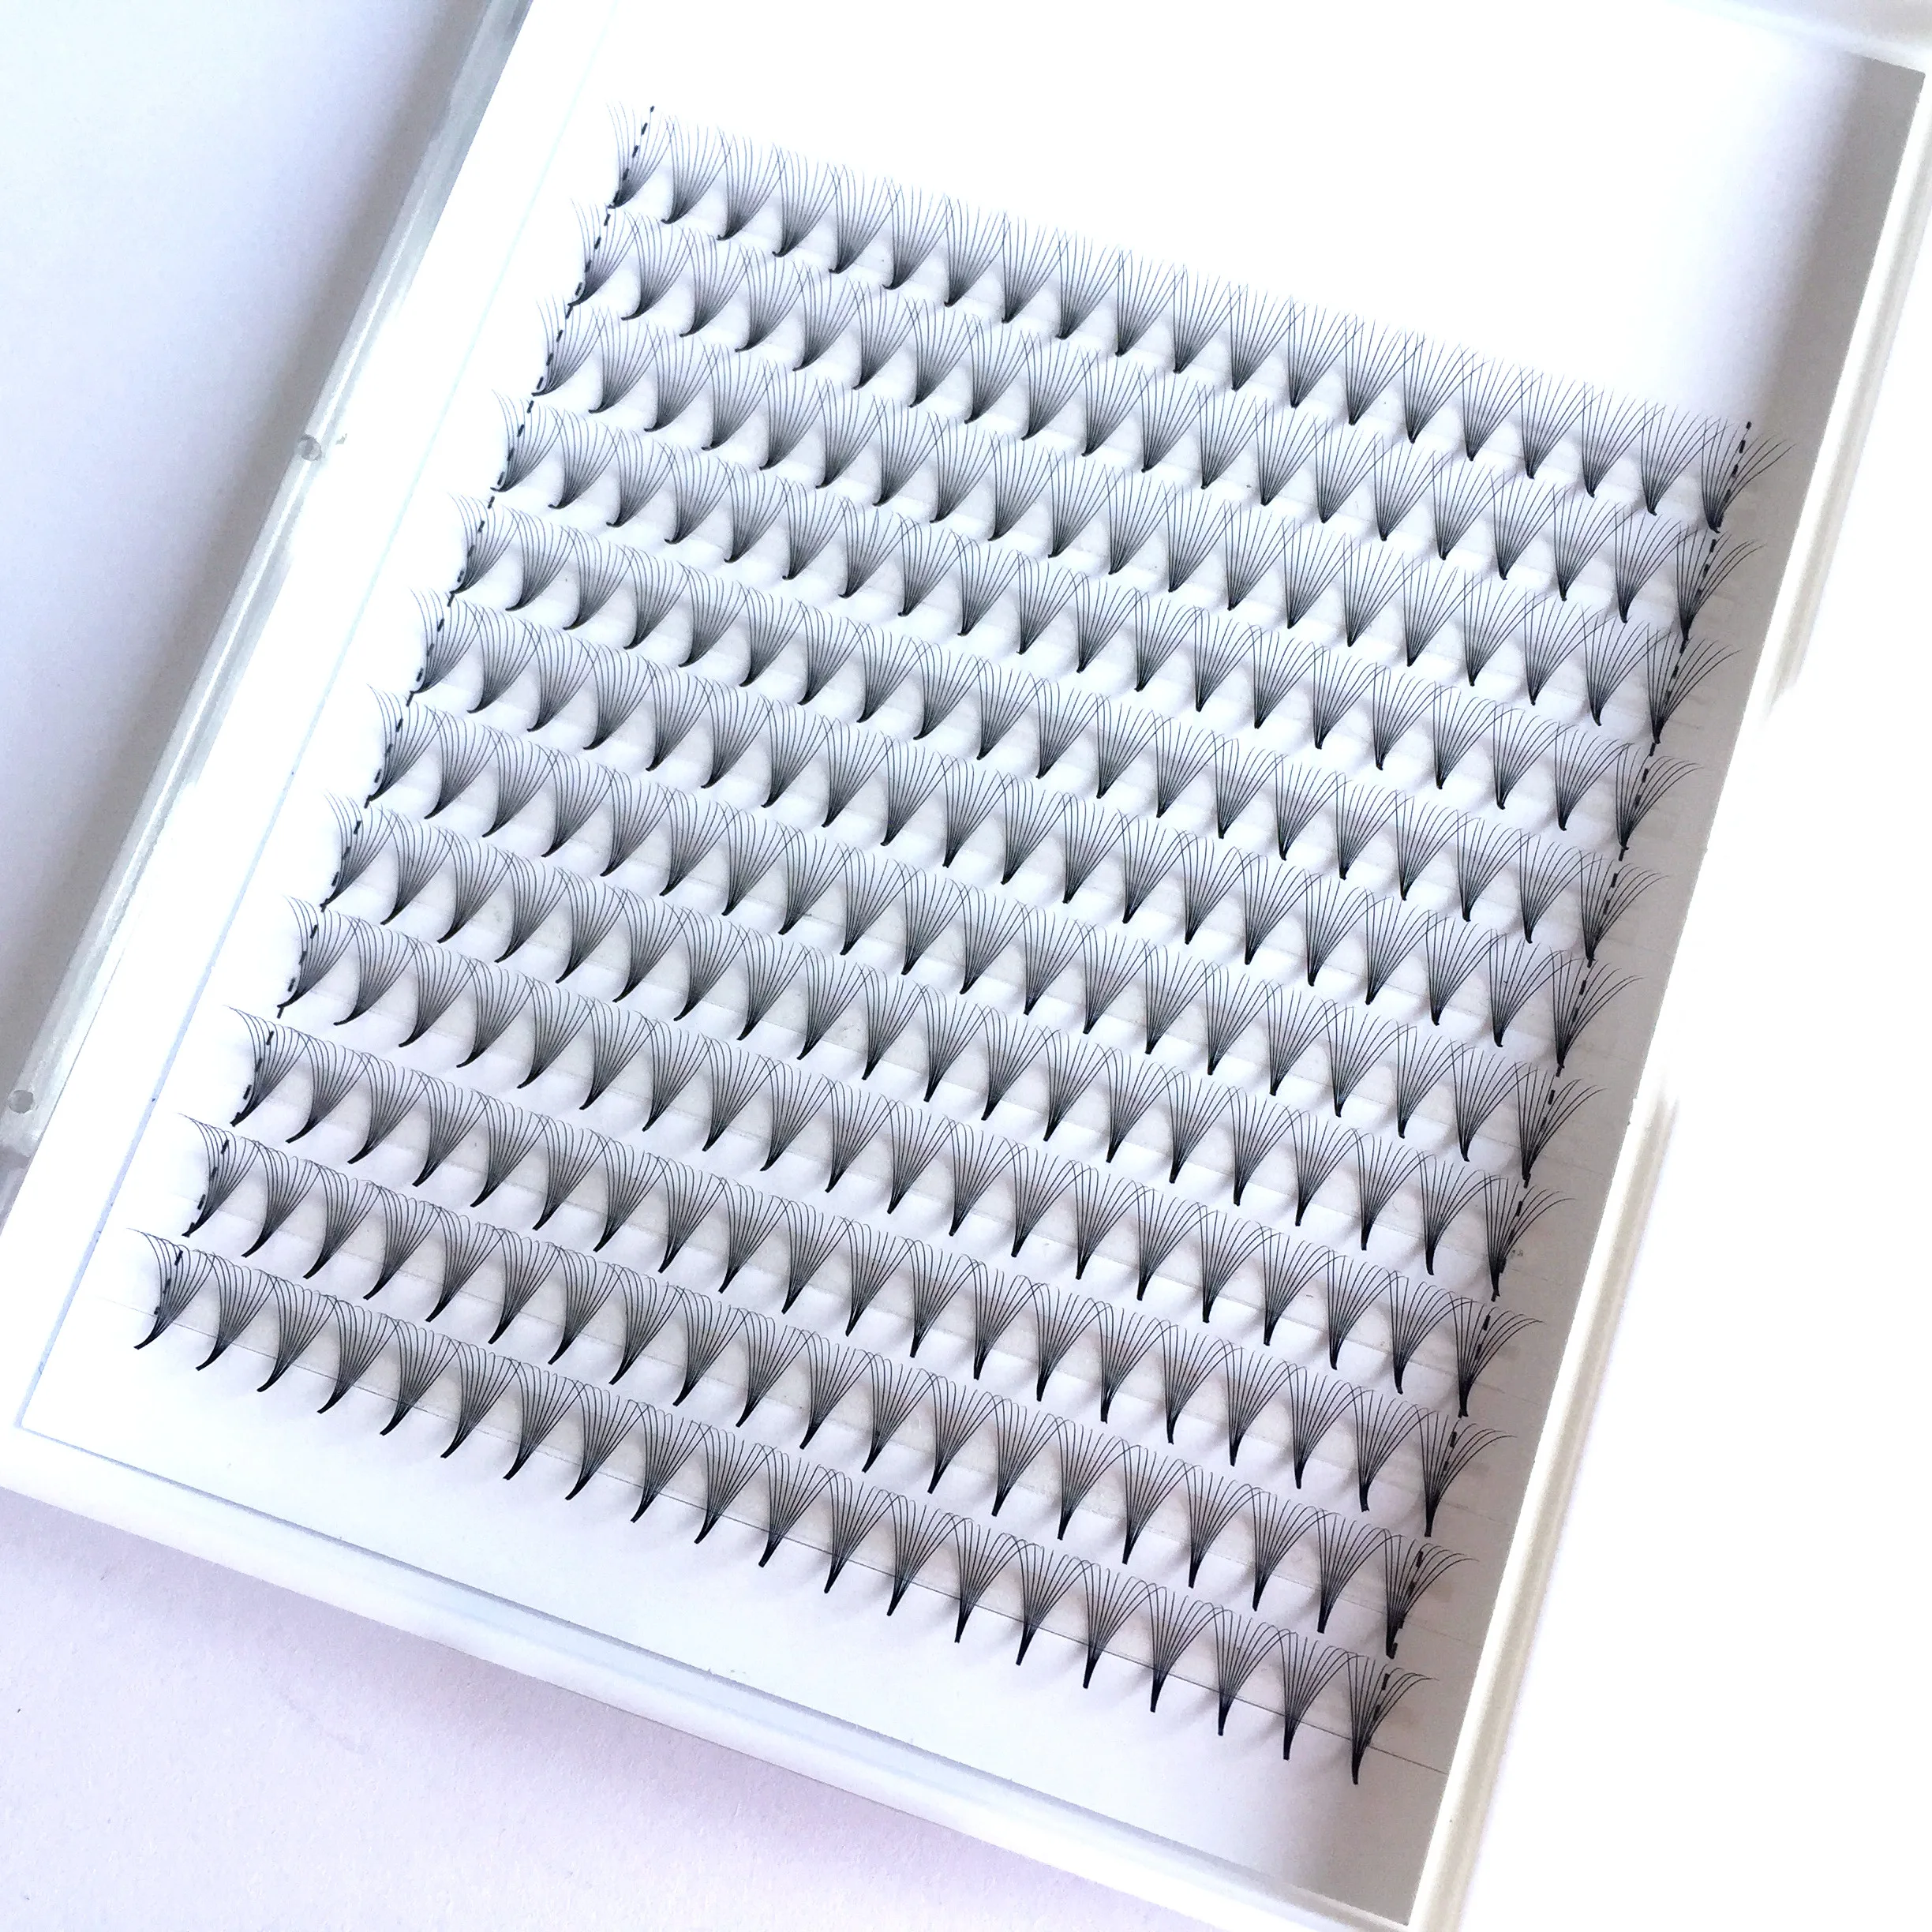 240 Pieces/Tray 7D 10D Pointy Sharp Slim Tips Volume Premade Fan Eyelashes Pre Made Lash Extension